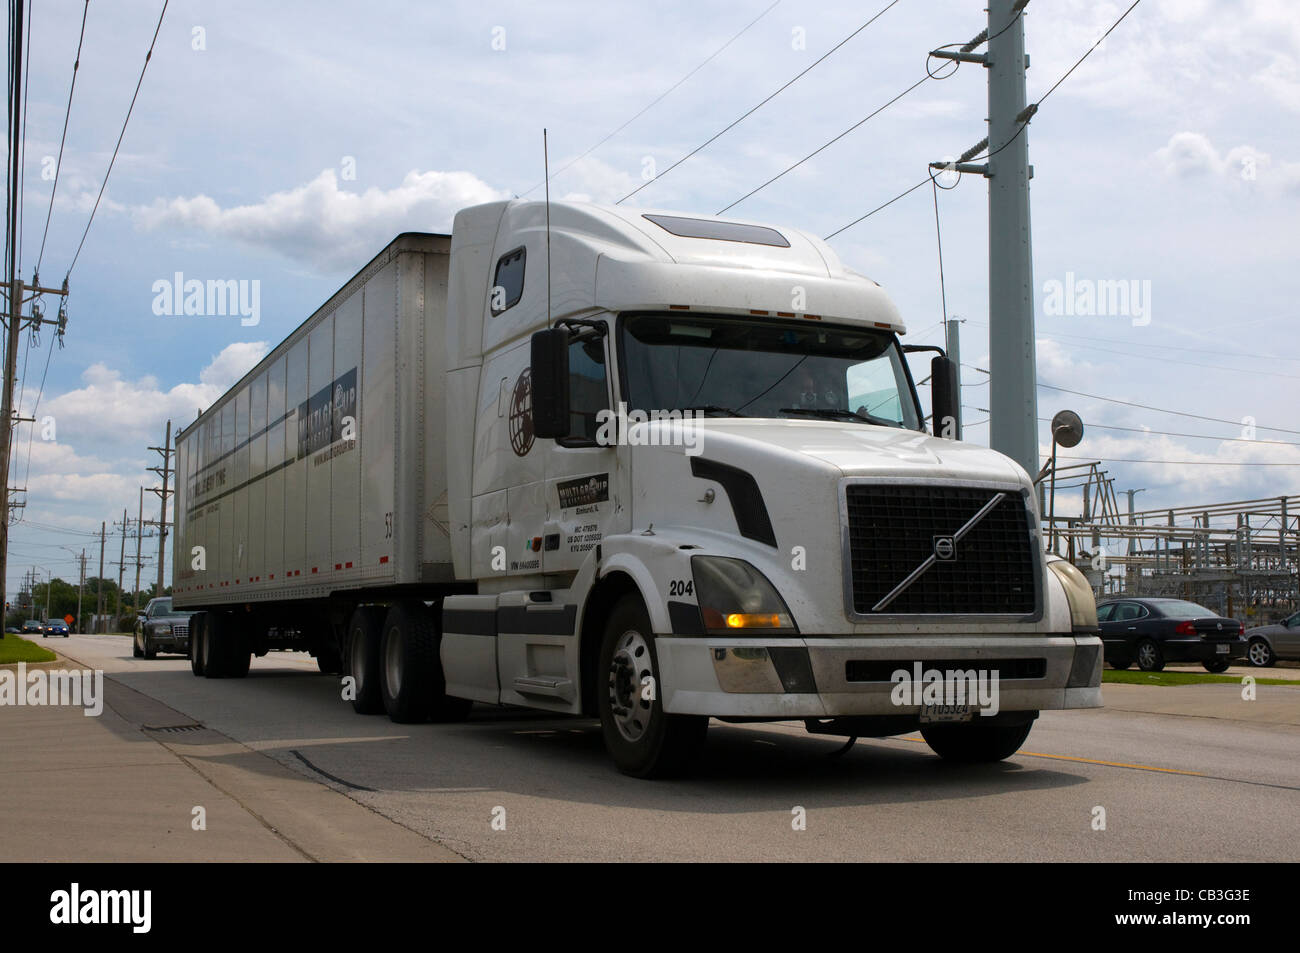 A white truck hauling cargo in Chicago. Stock Photo